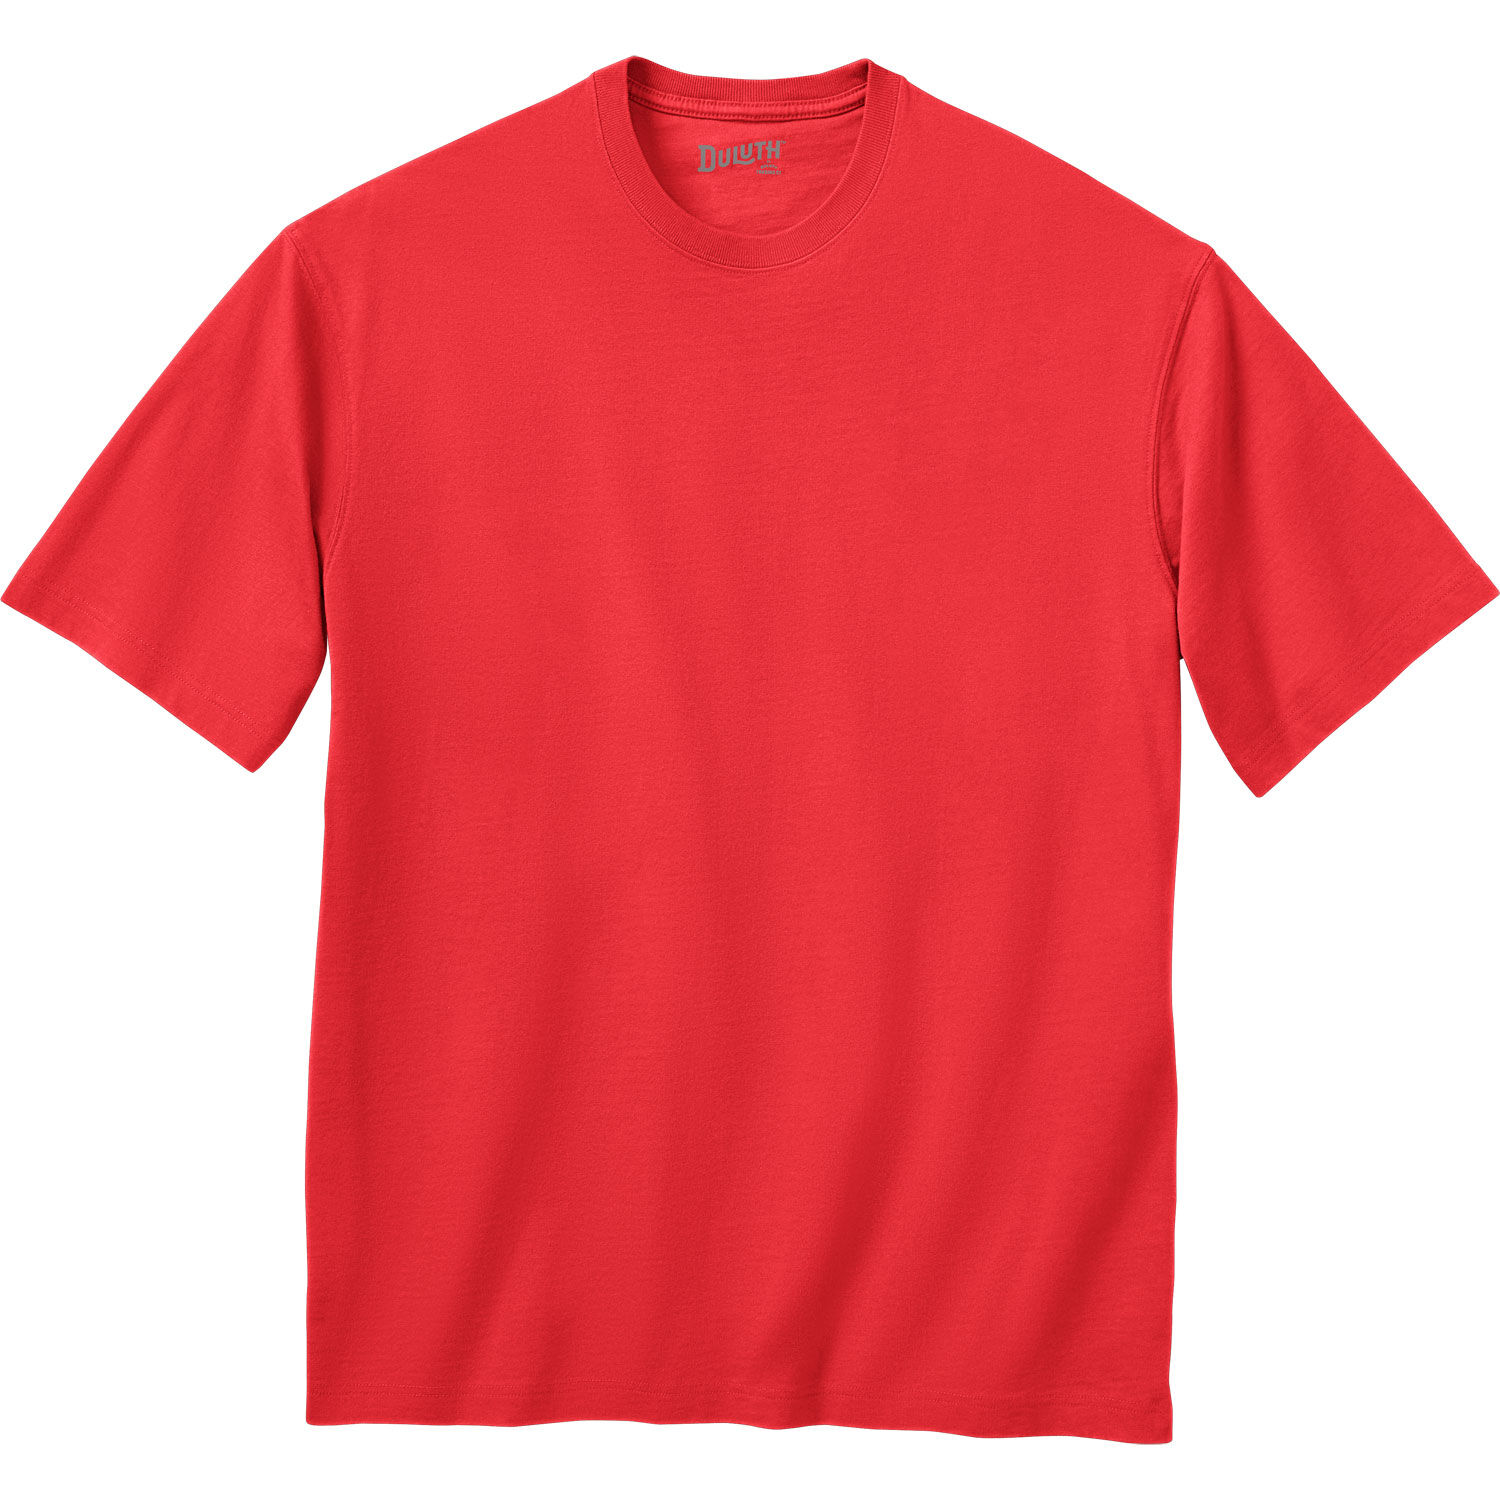 Men's Longtail T Relaxed Fit Short Sleeve T-Shirt - Red LRG - Duluth Trading Company